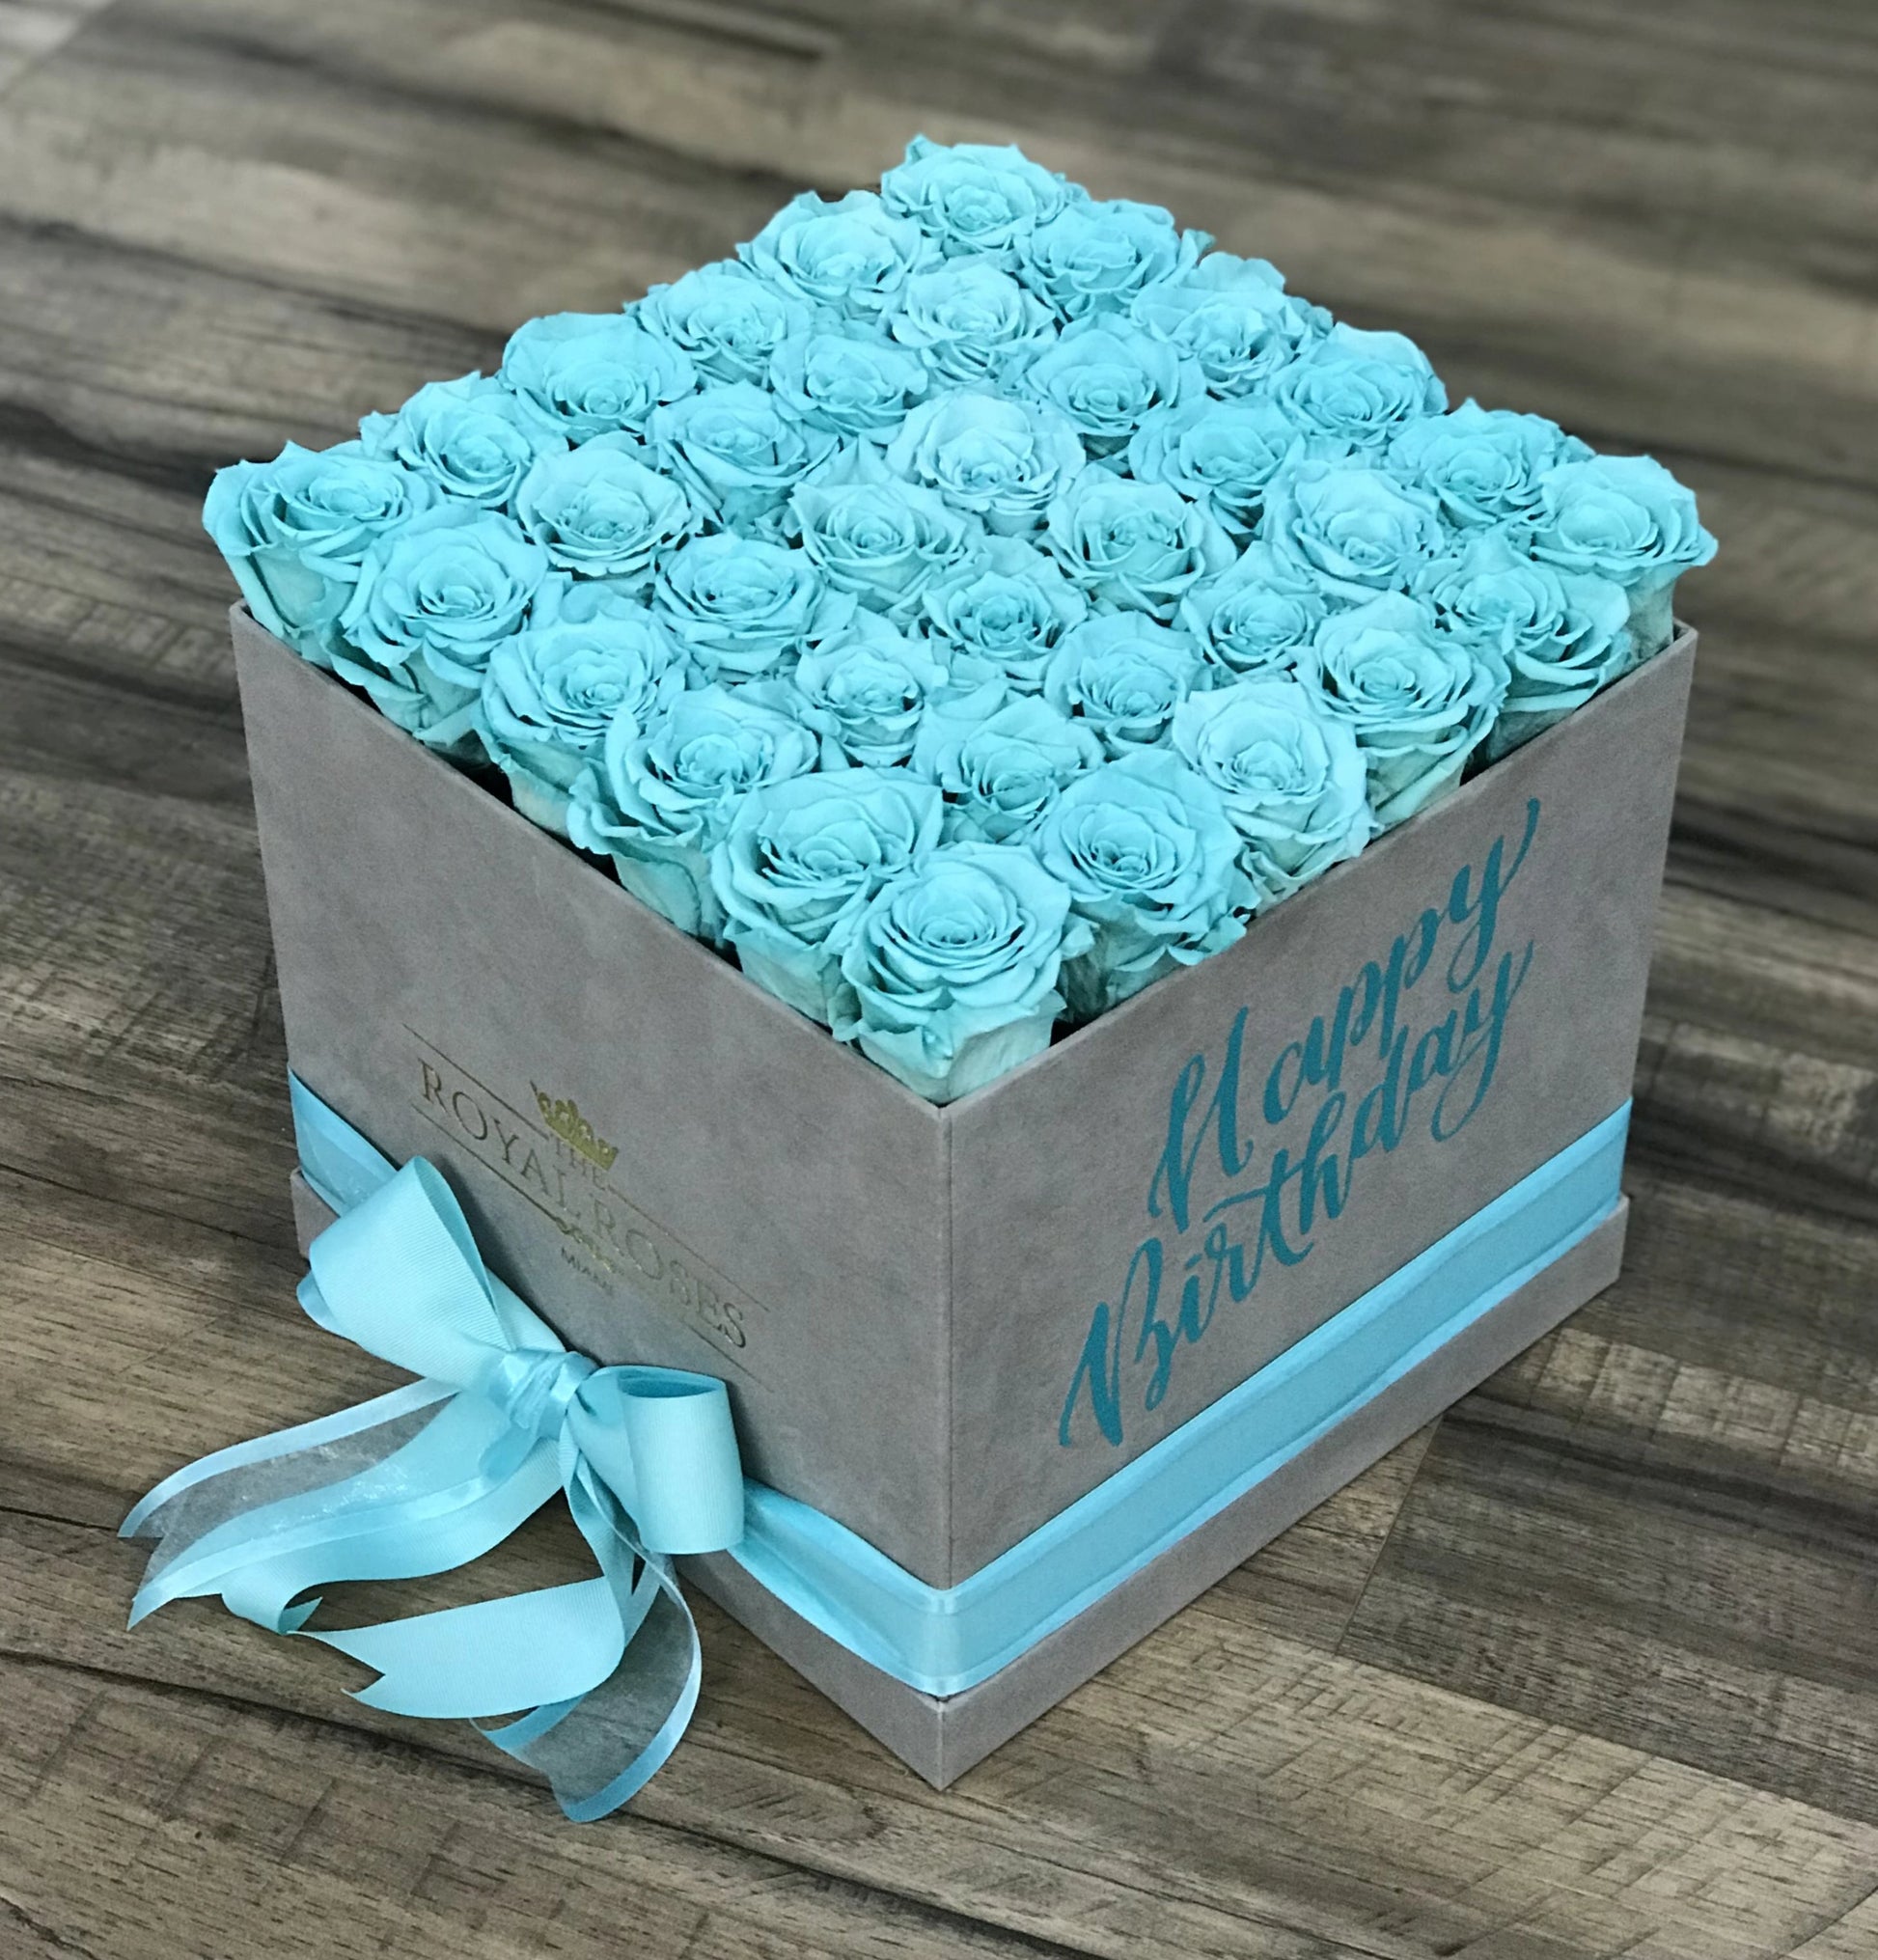 Real Long Lasting Roses - Square Box - Lifetime is Over 1 Year - The Royal Roses 